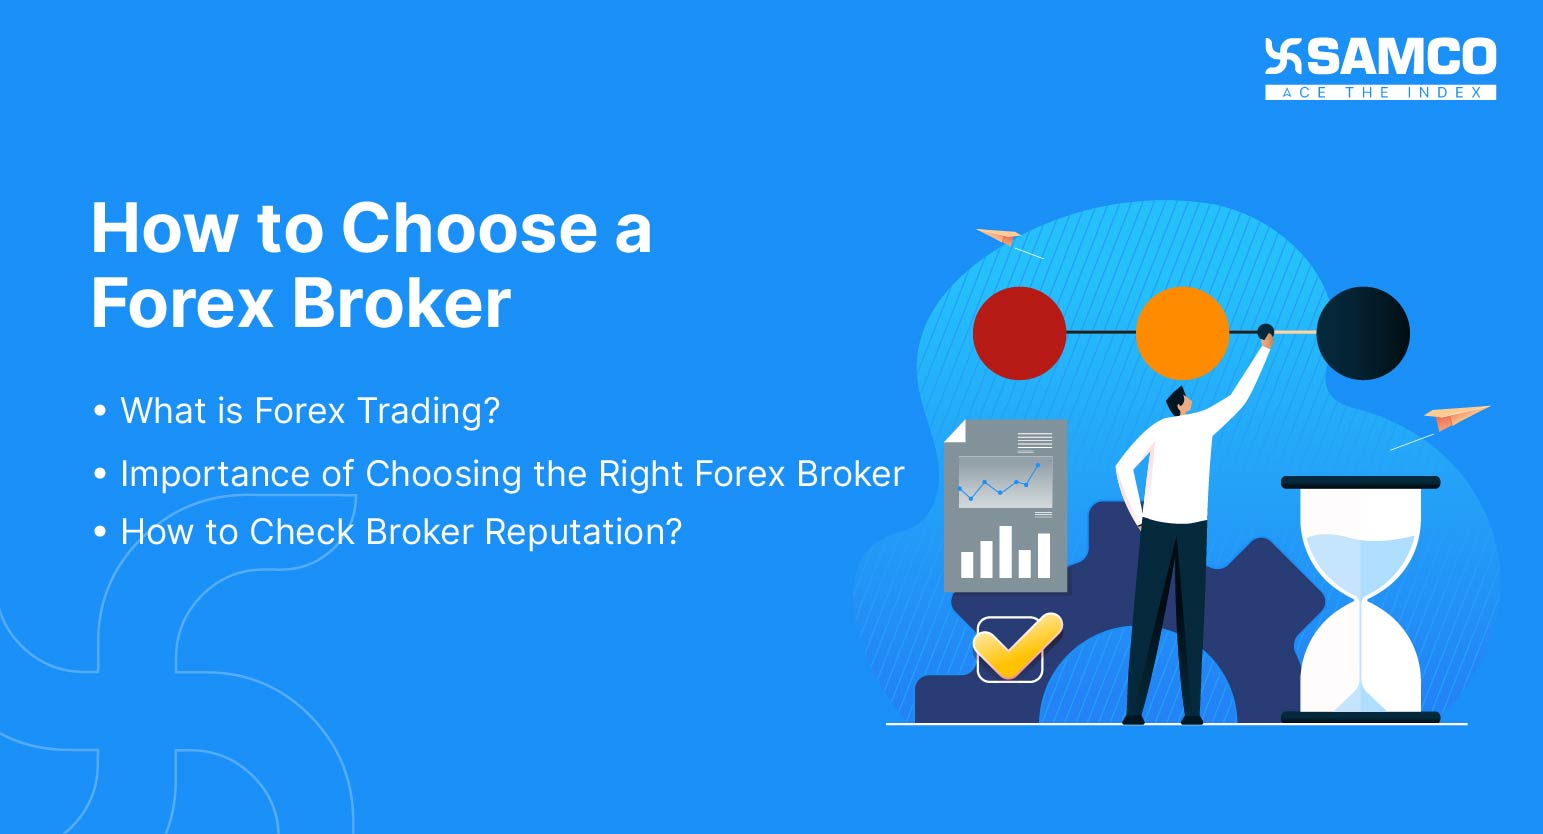 How to Choose a Forex Broker for Trading